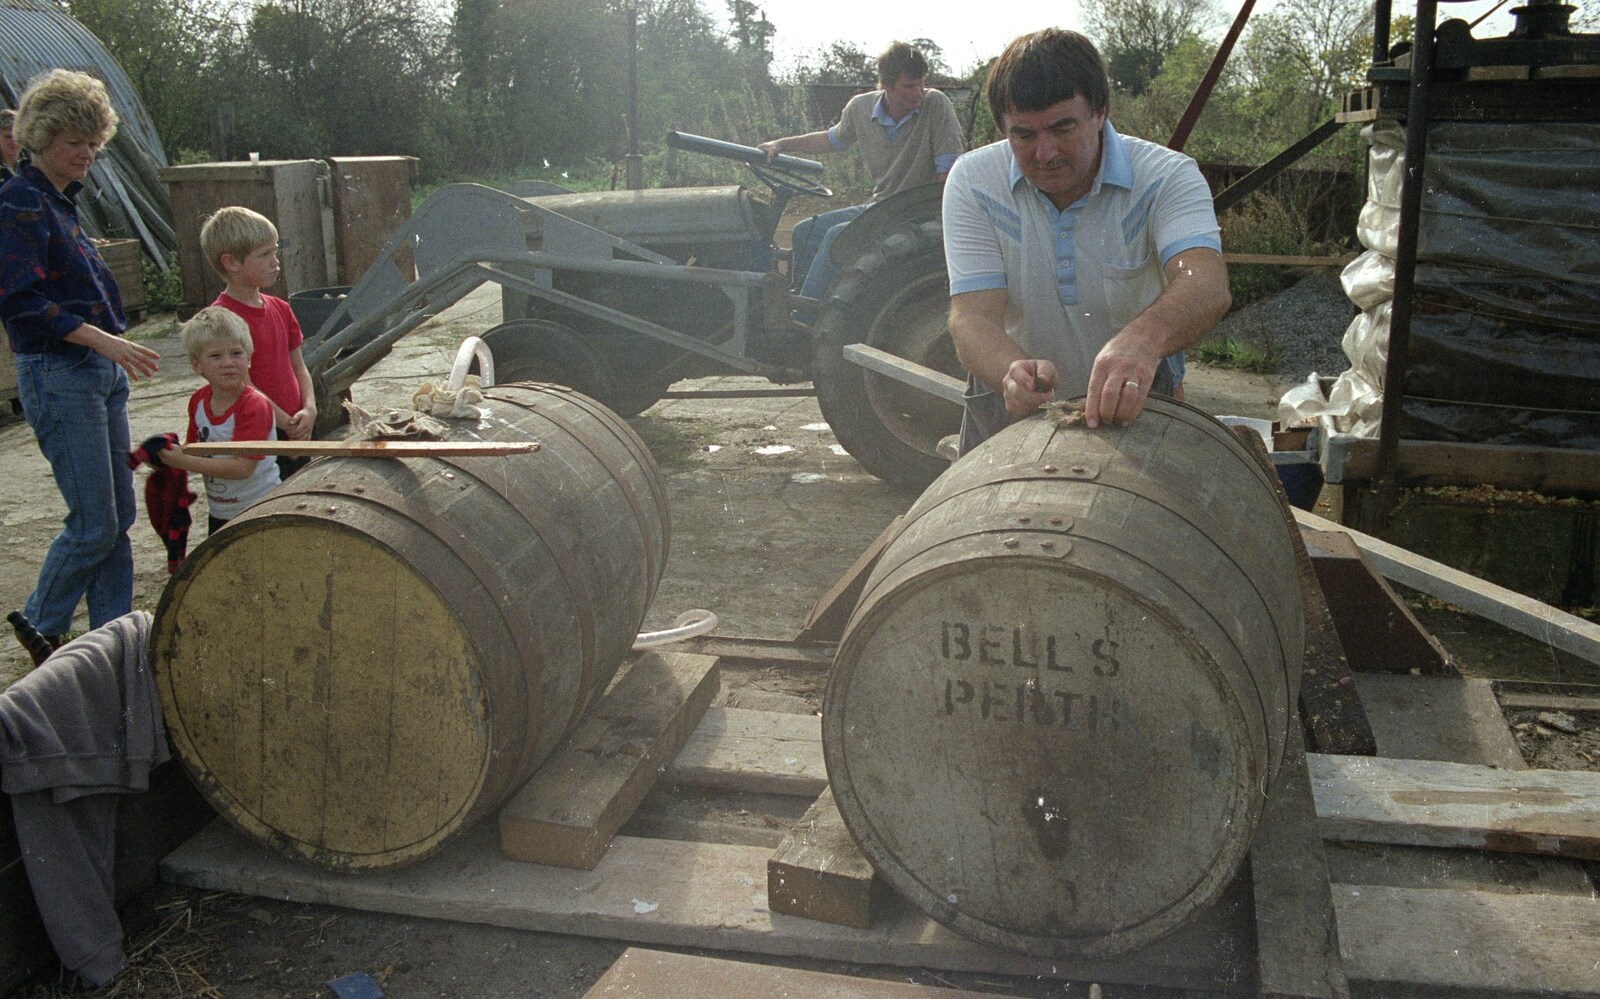 Corky prepares a couple of barrels from The Annual Cider Making Event, Stuston, Suffolk - 11th October 1990